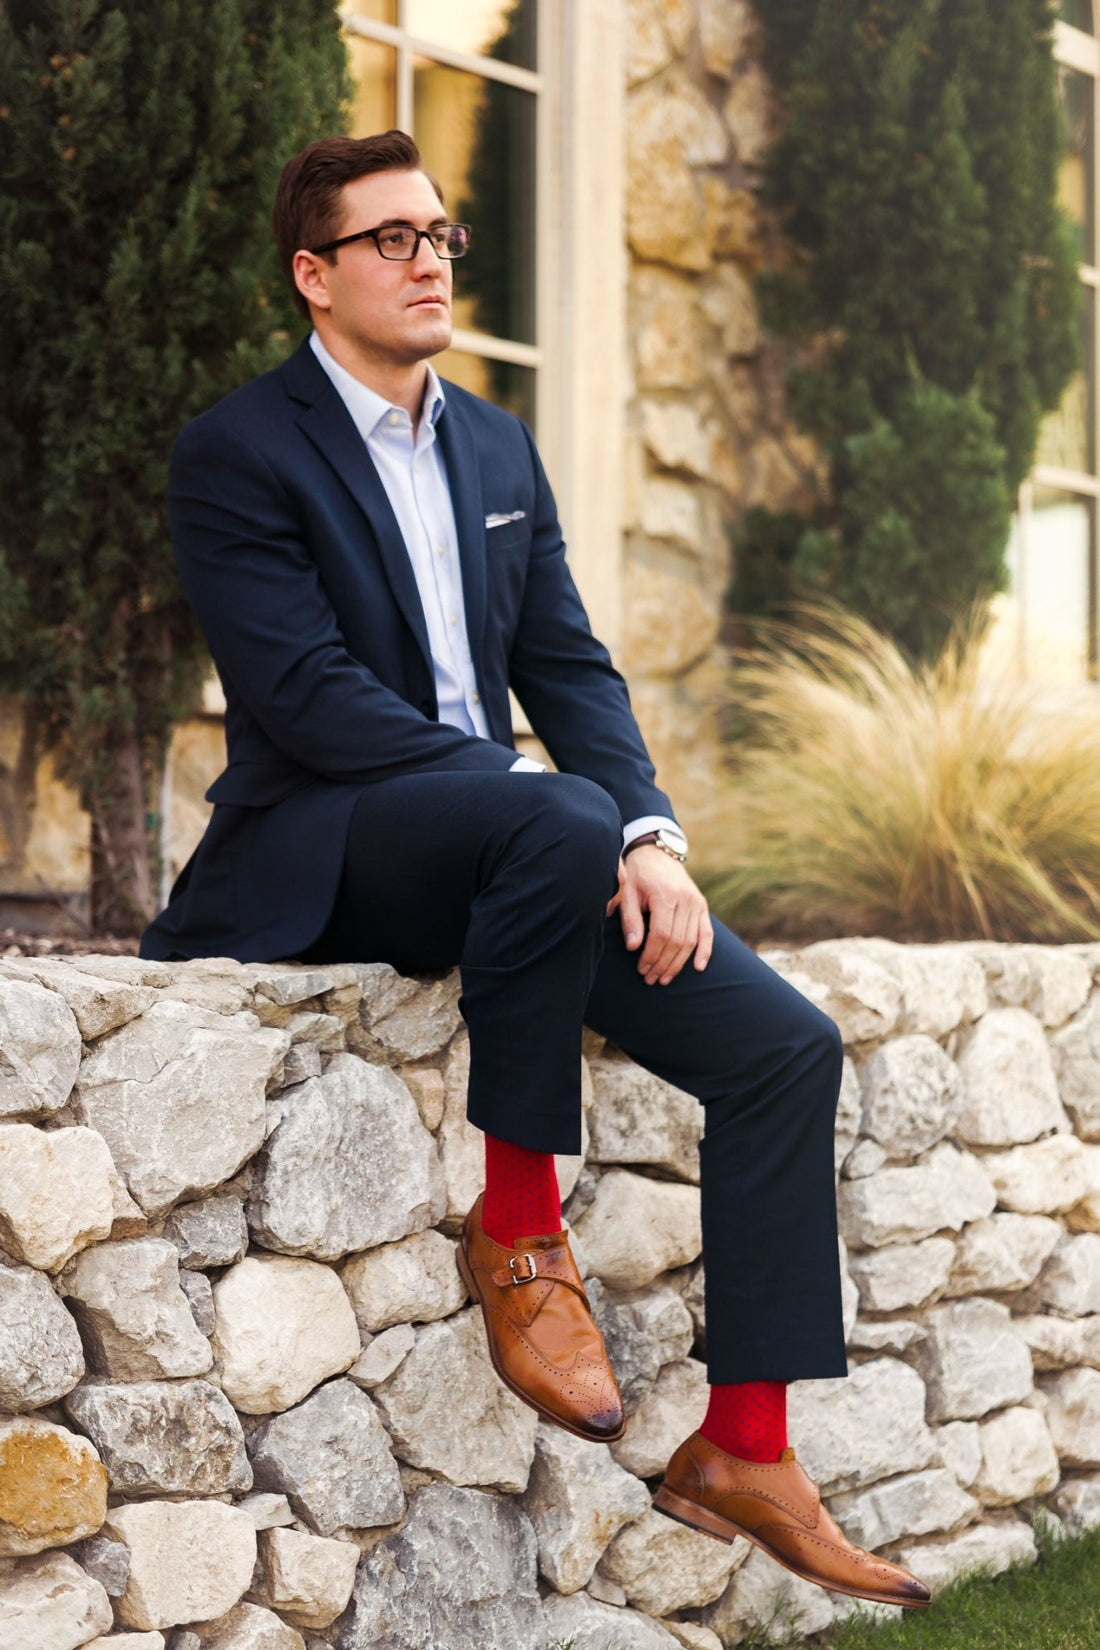 Man in suit shows off awesome socks